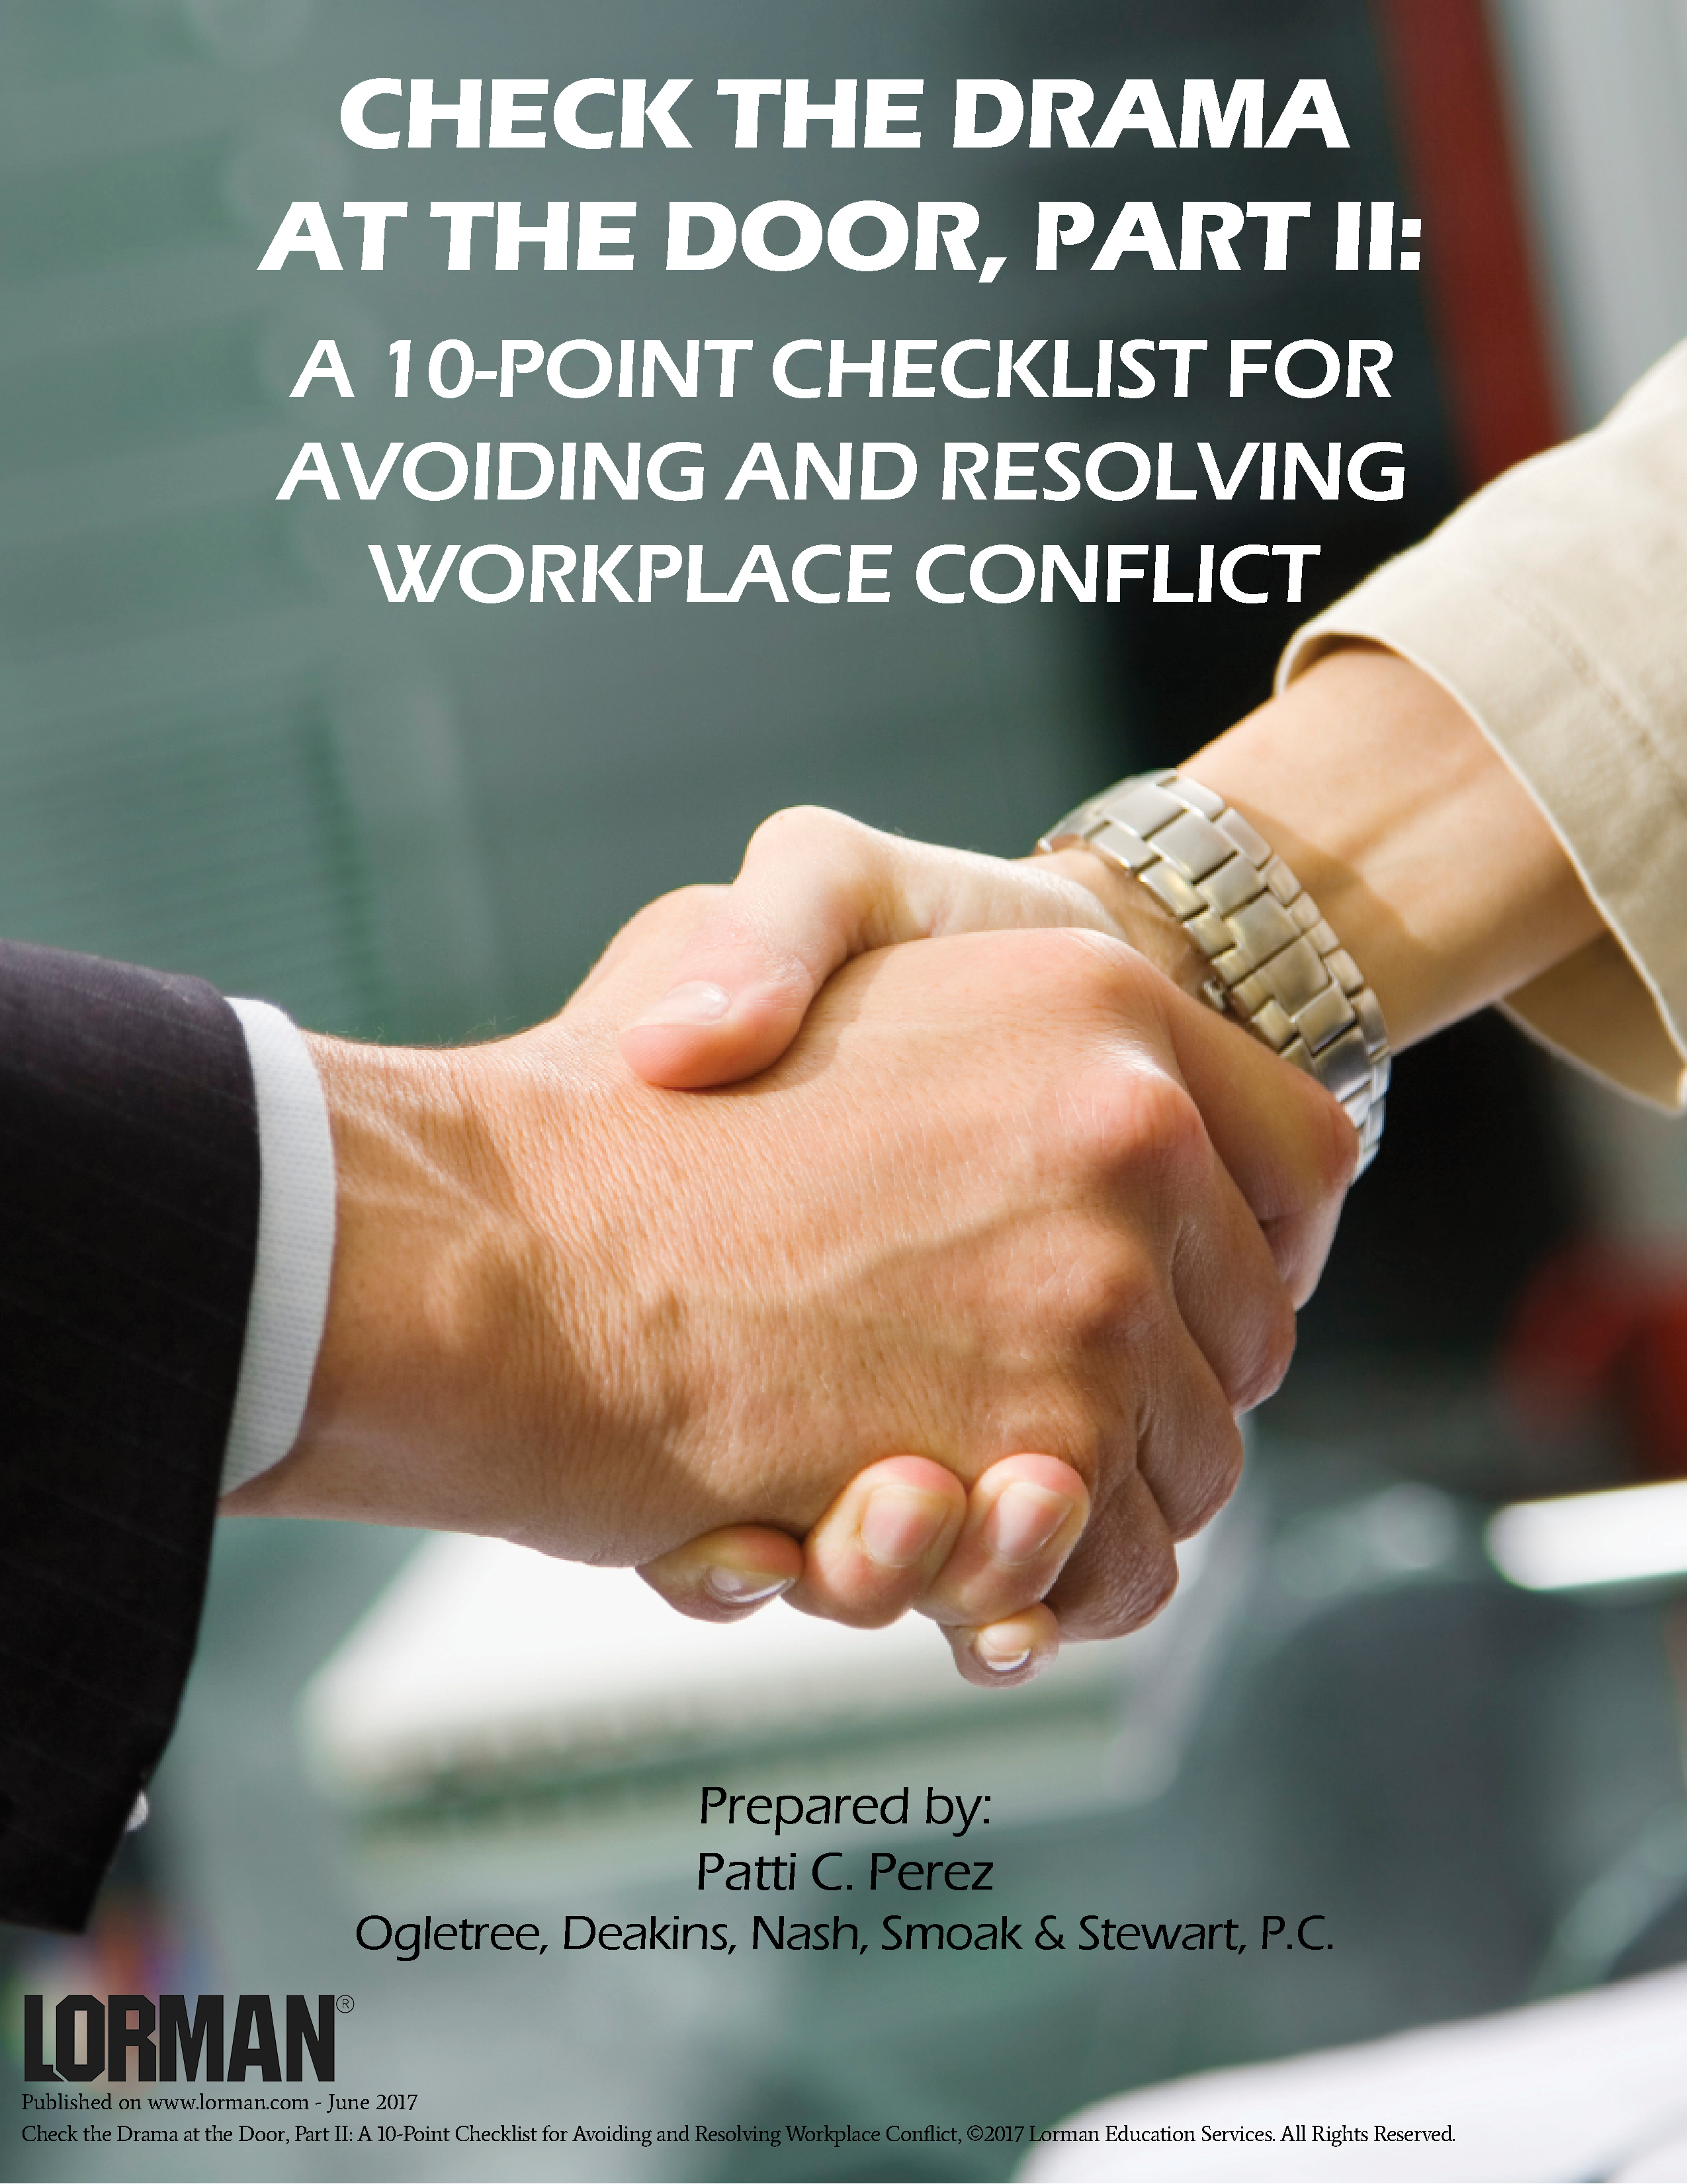 Check the Drama at the Door - Part 2: 10-Point Checklist to Avoid and Resolve Workplace Conflict